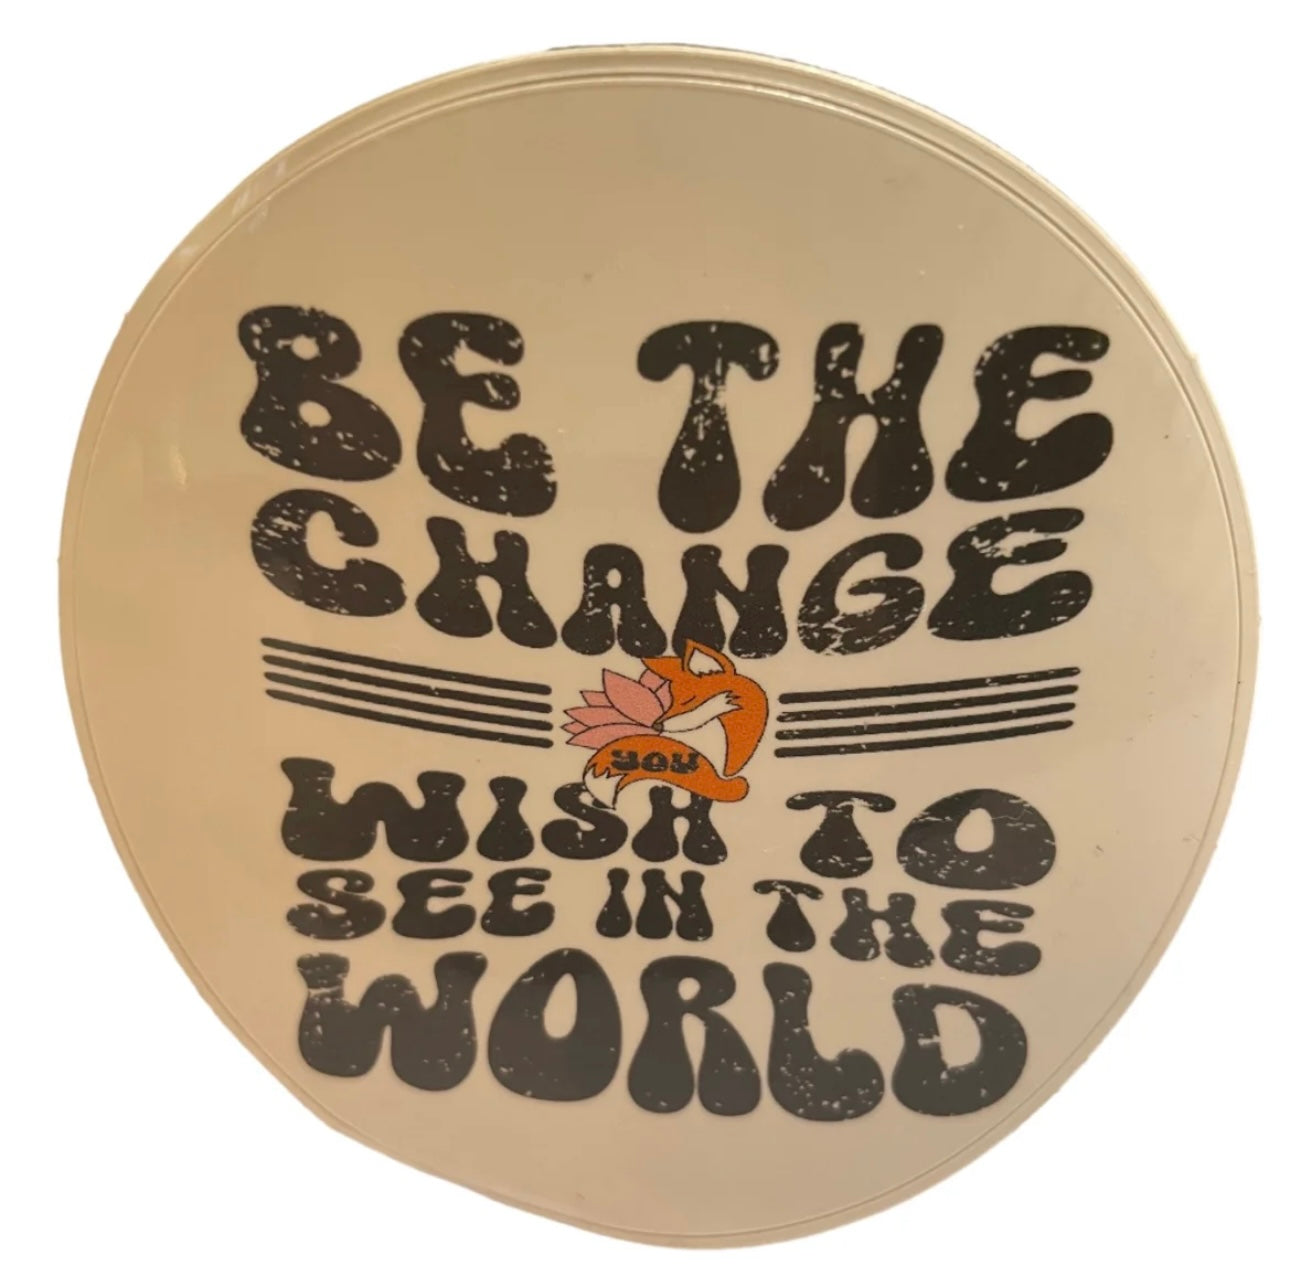 Be The Change Leotard (comes with a free sticker!)